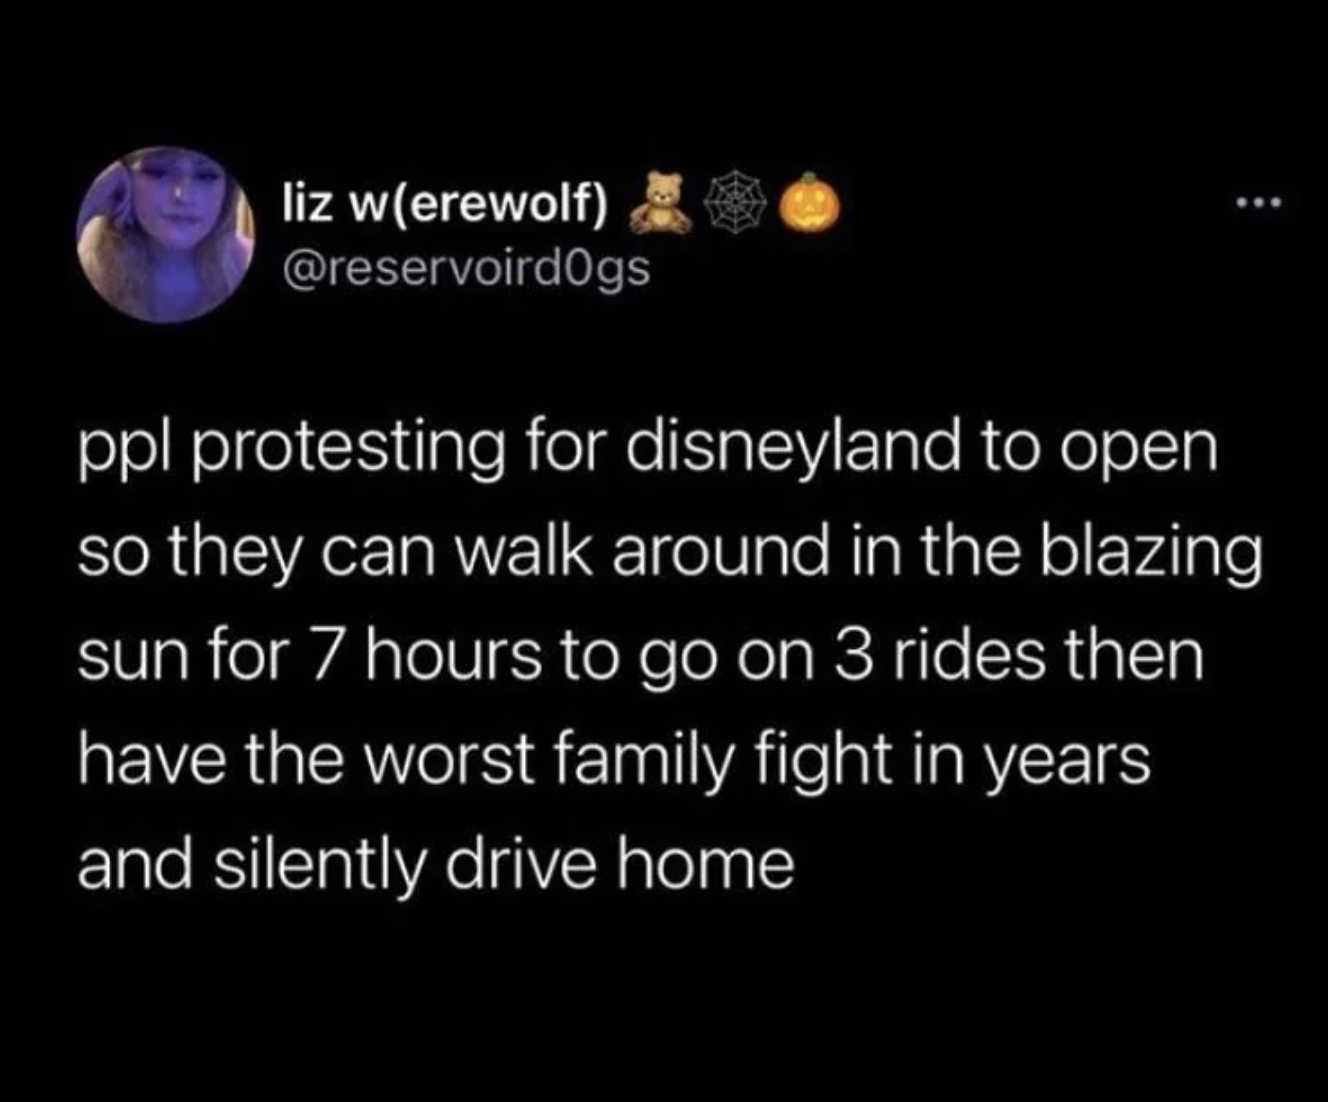 screenshot - liz werewolf ppl protesting for disneyland to open so they can walk around in the blazing sun for 7 hours to go on 3 rides then have the worst family fight in years and silently drive home